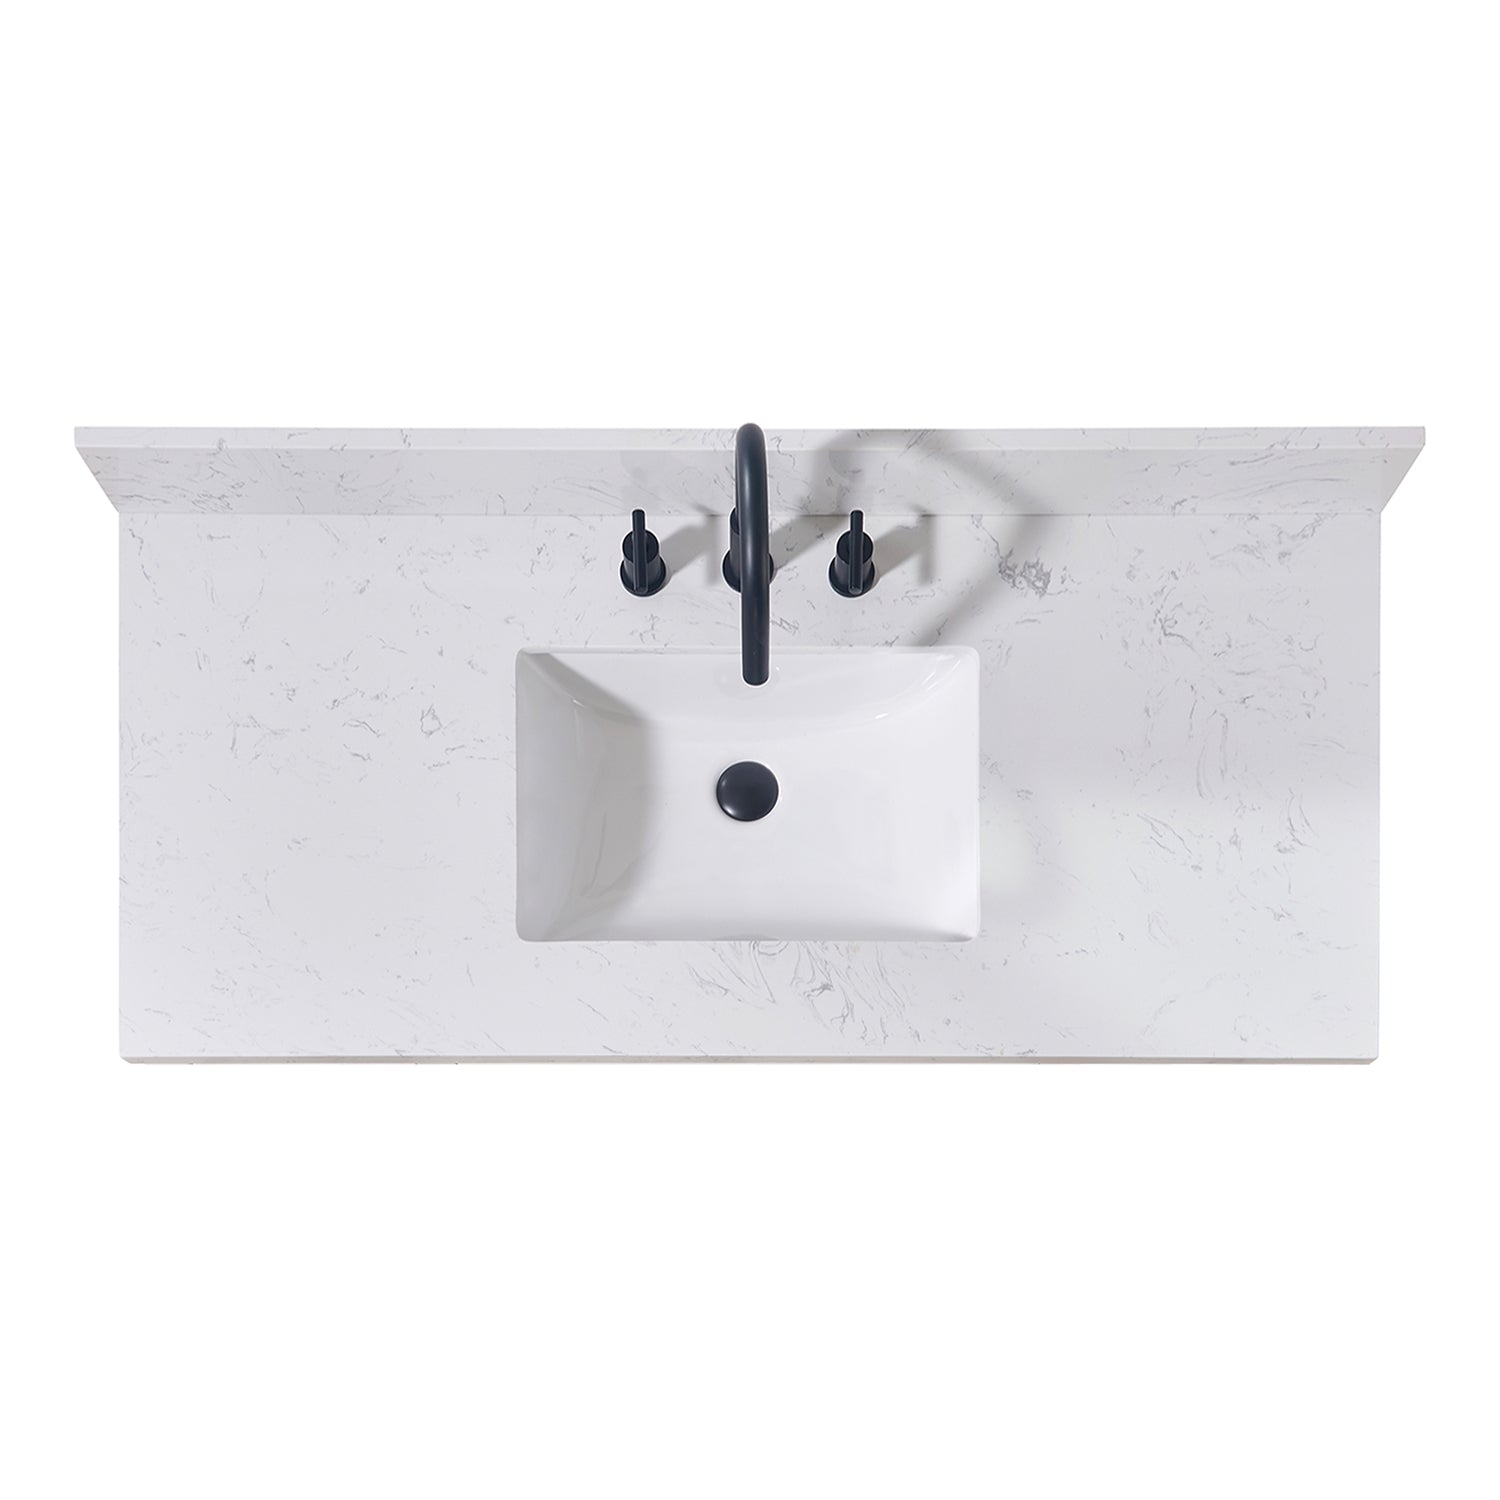 Oderzo Stone effects Single Sink Vanity Top in Aosta White with White Sink